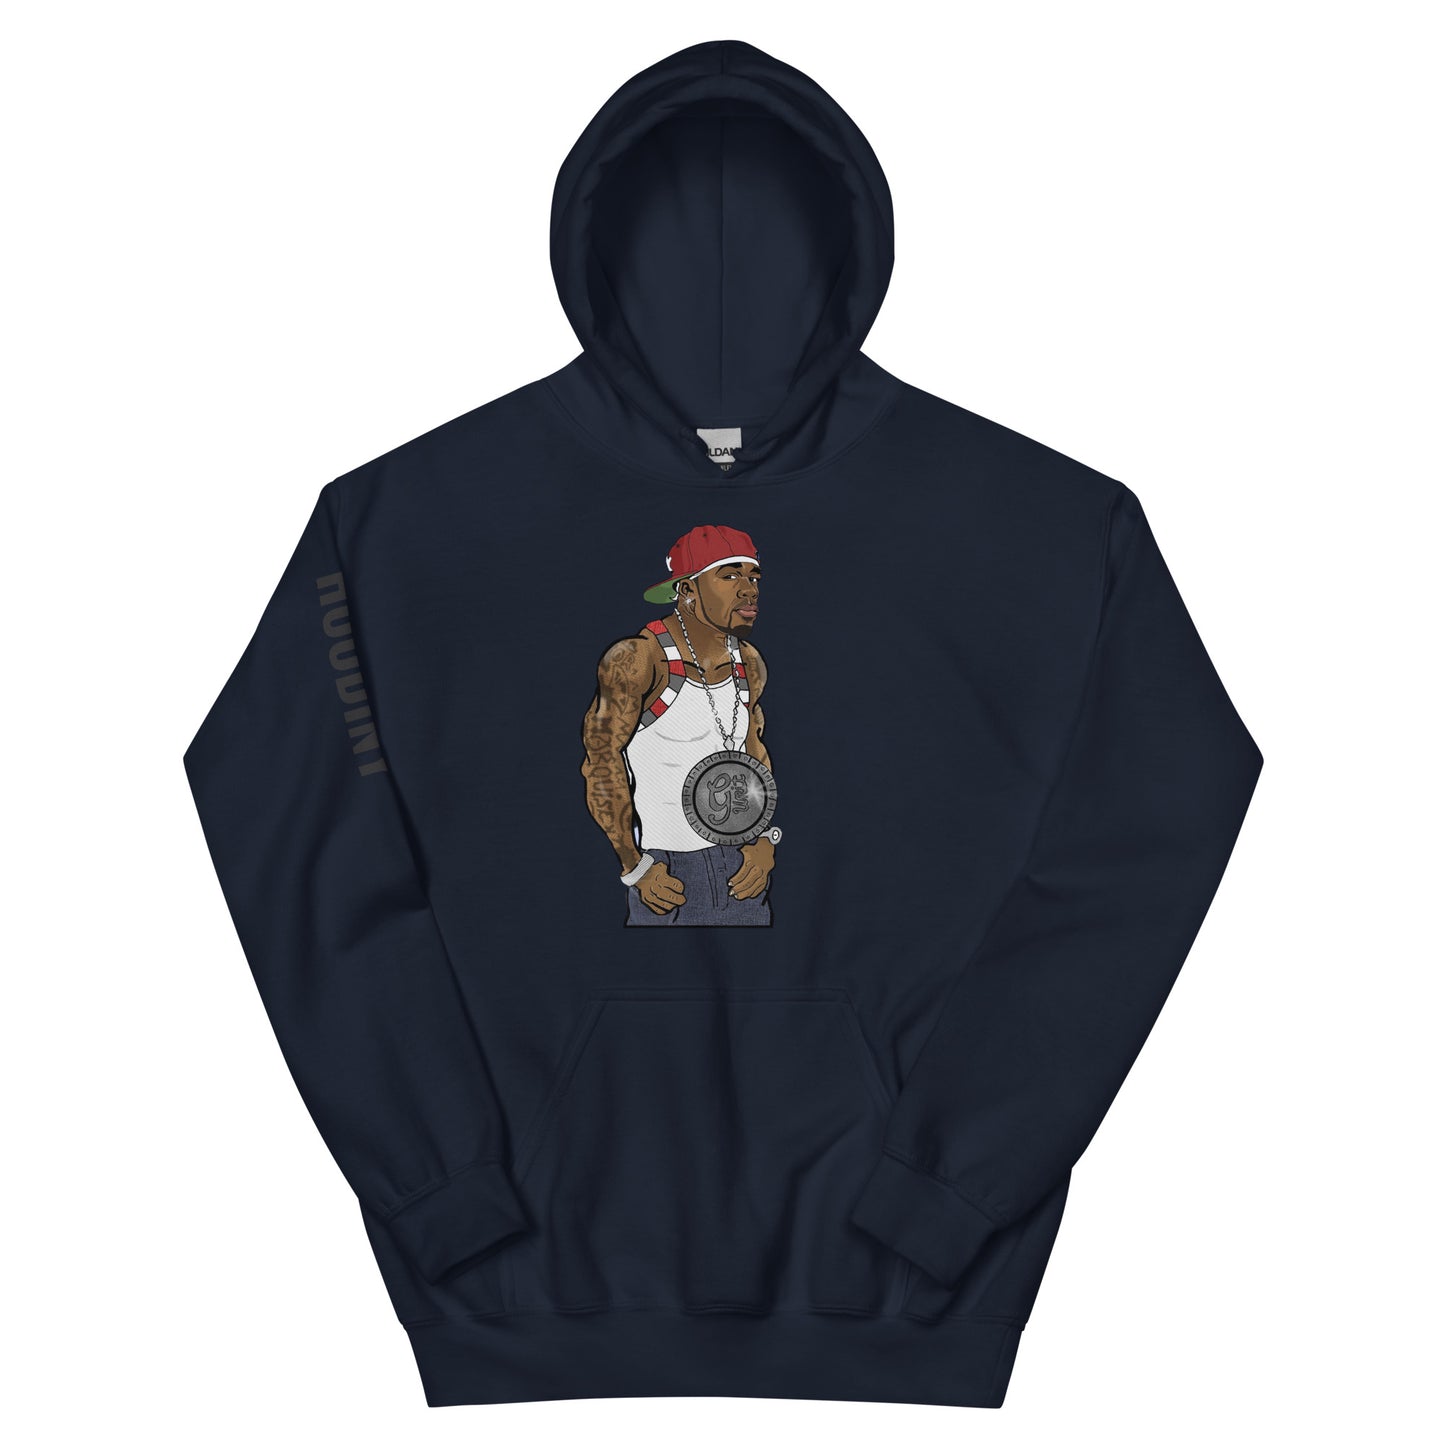 50 Cent Hoodie